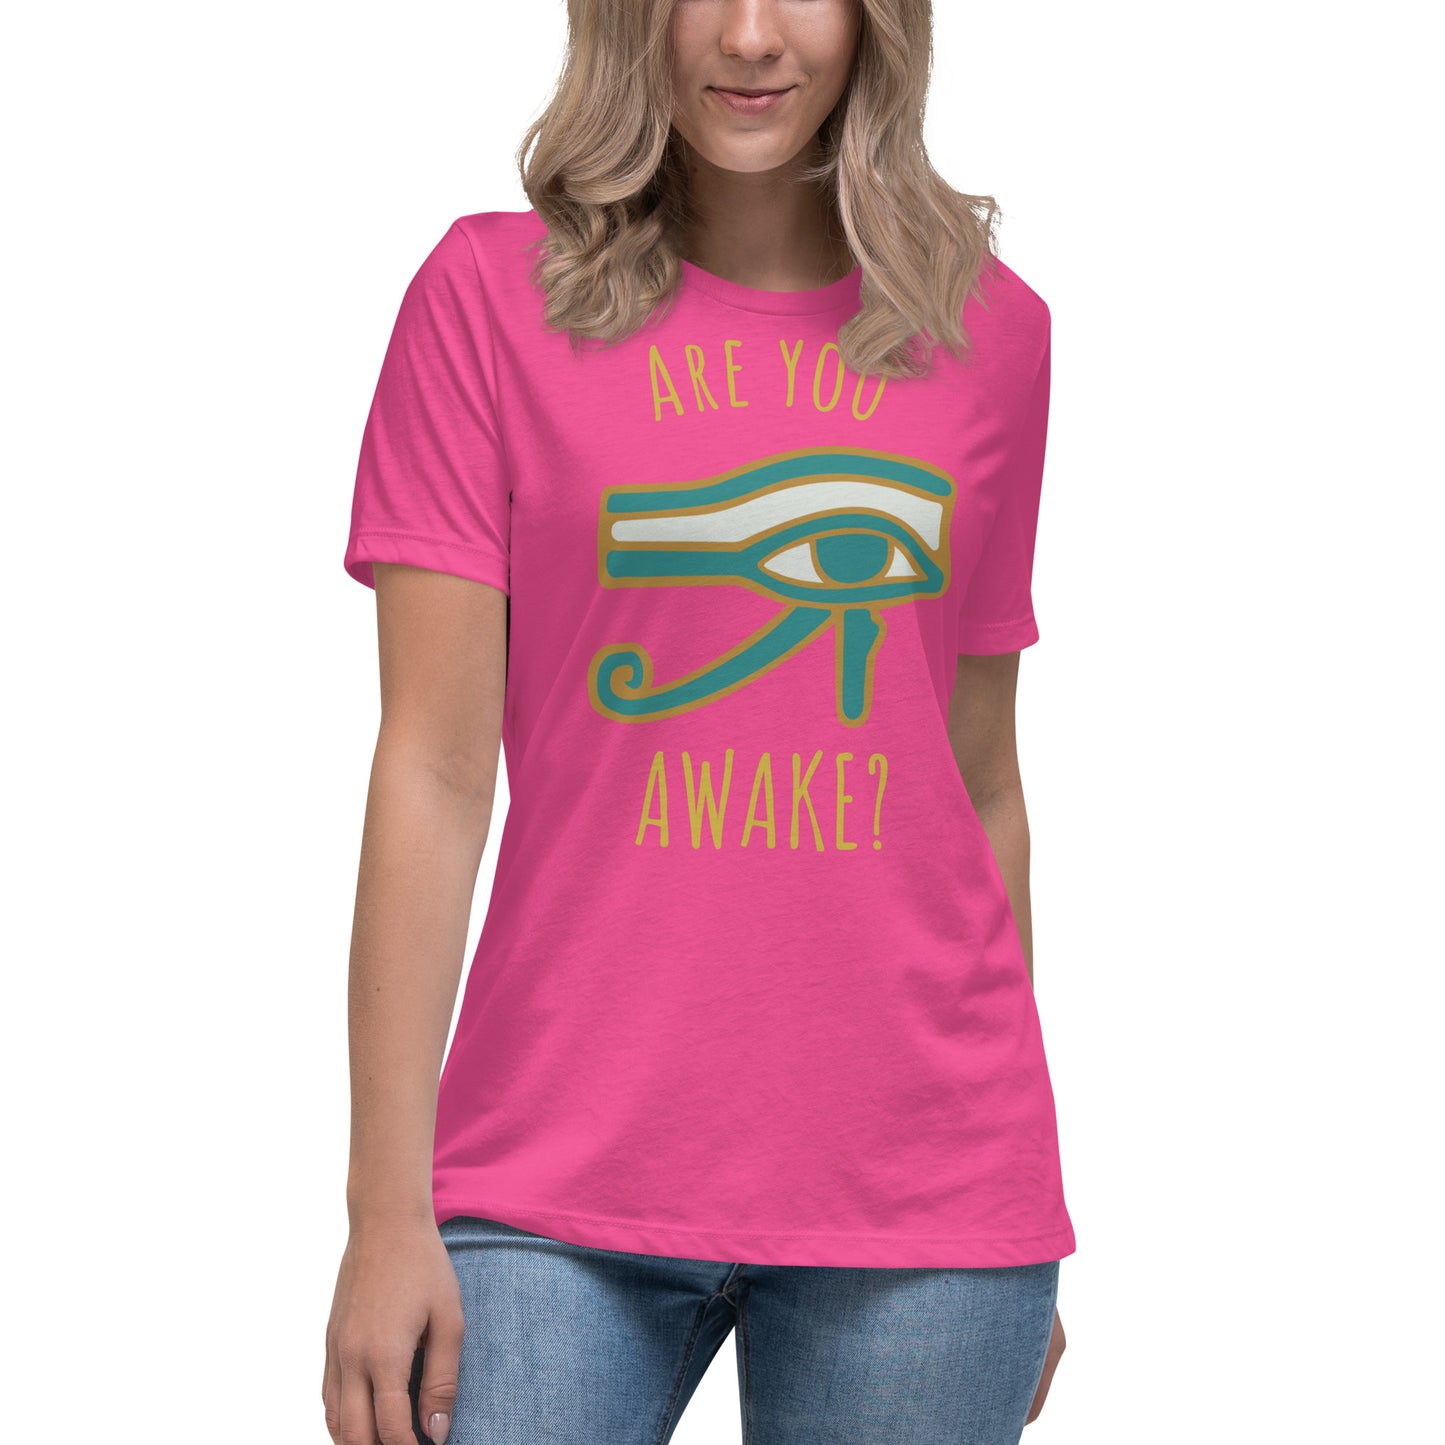 Are you AWAKE? Third Eye women's tee (gold lettering)